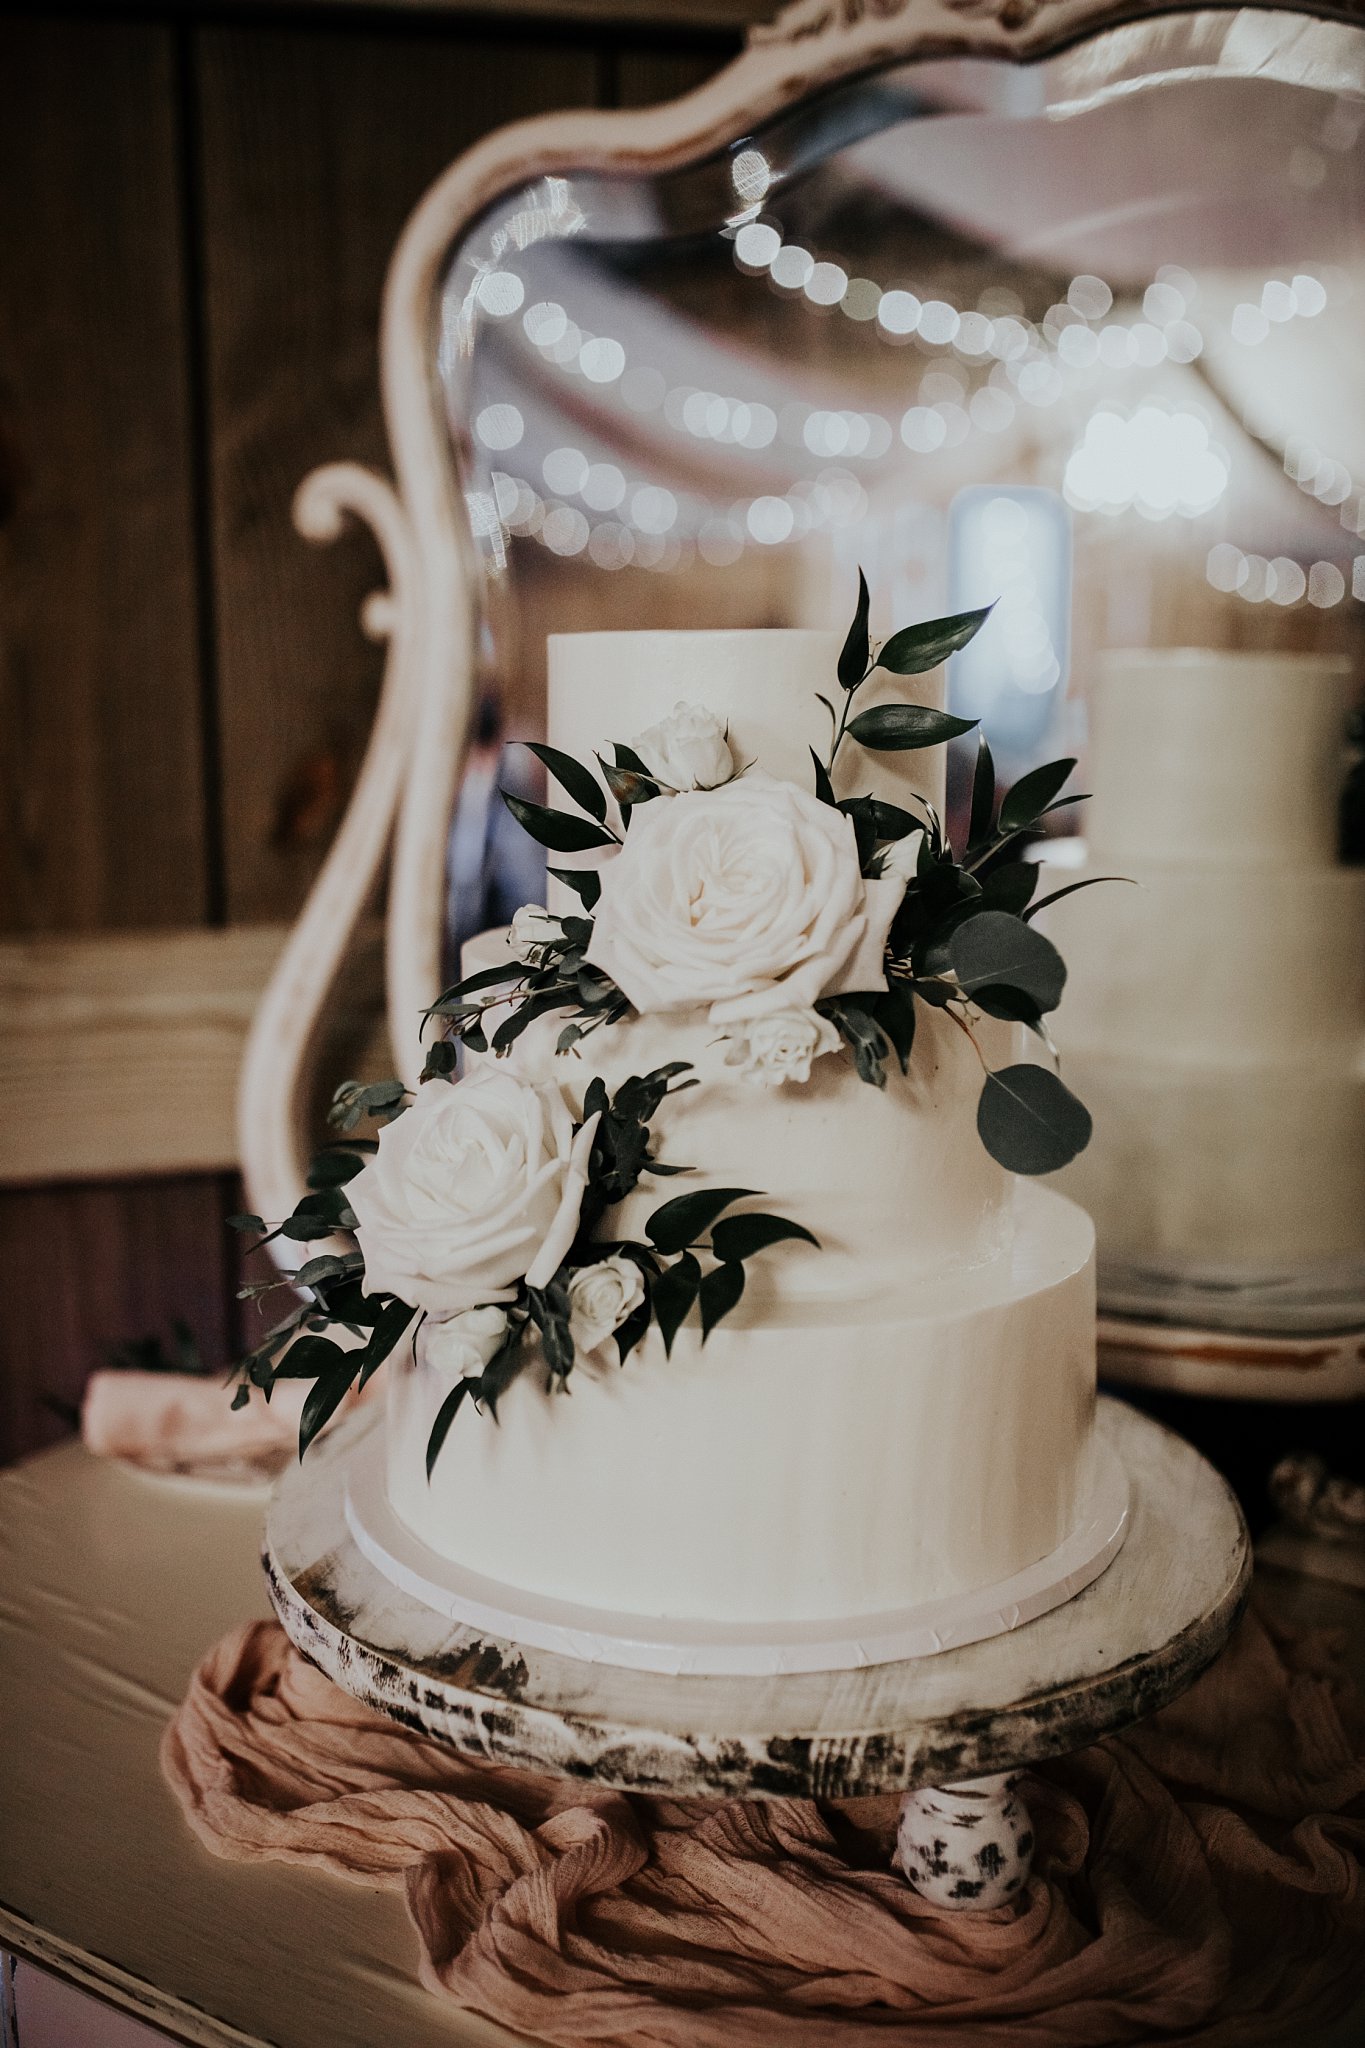 Three tier white wedding cake with white roses and greenery